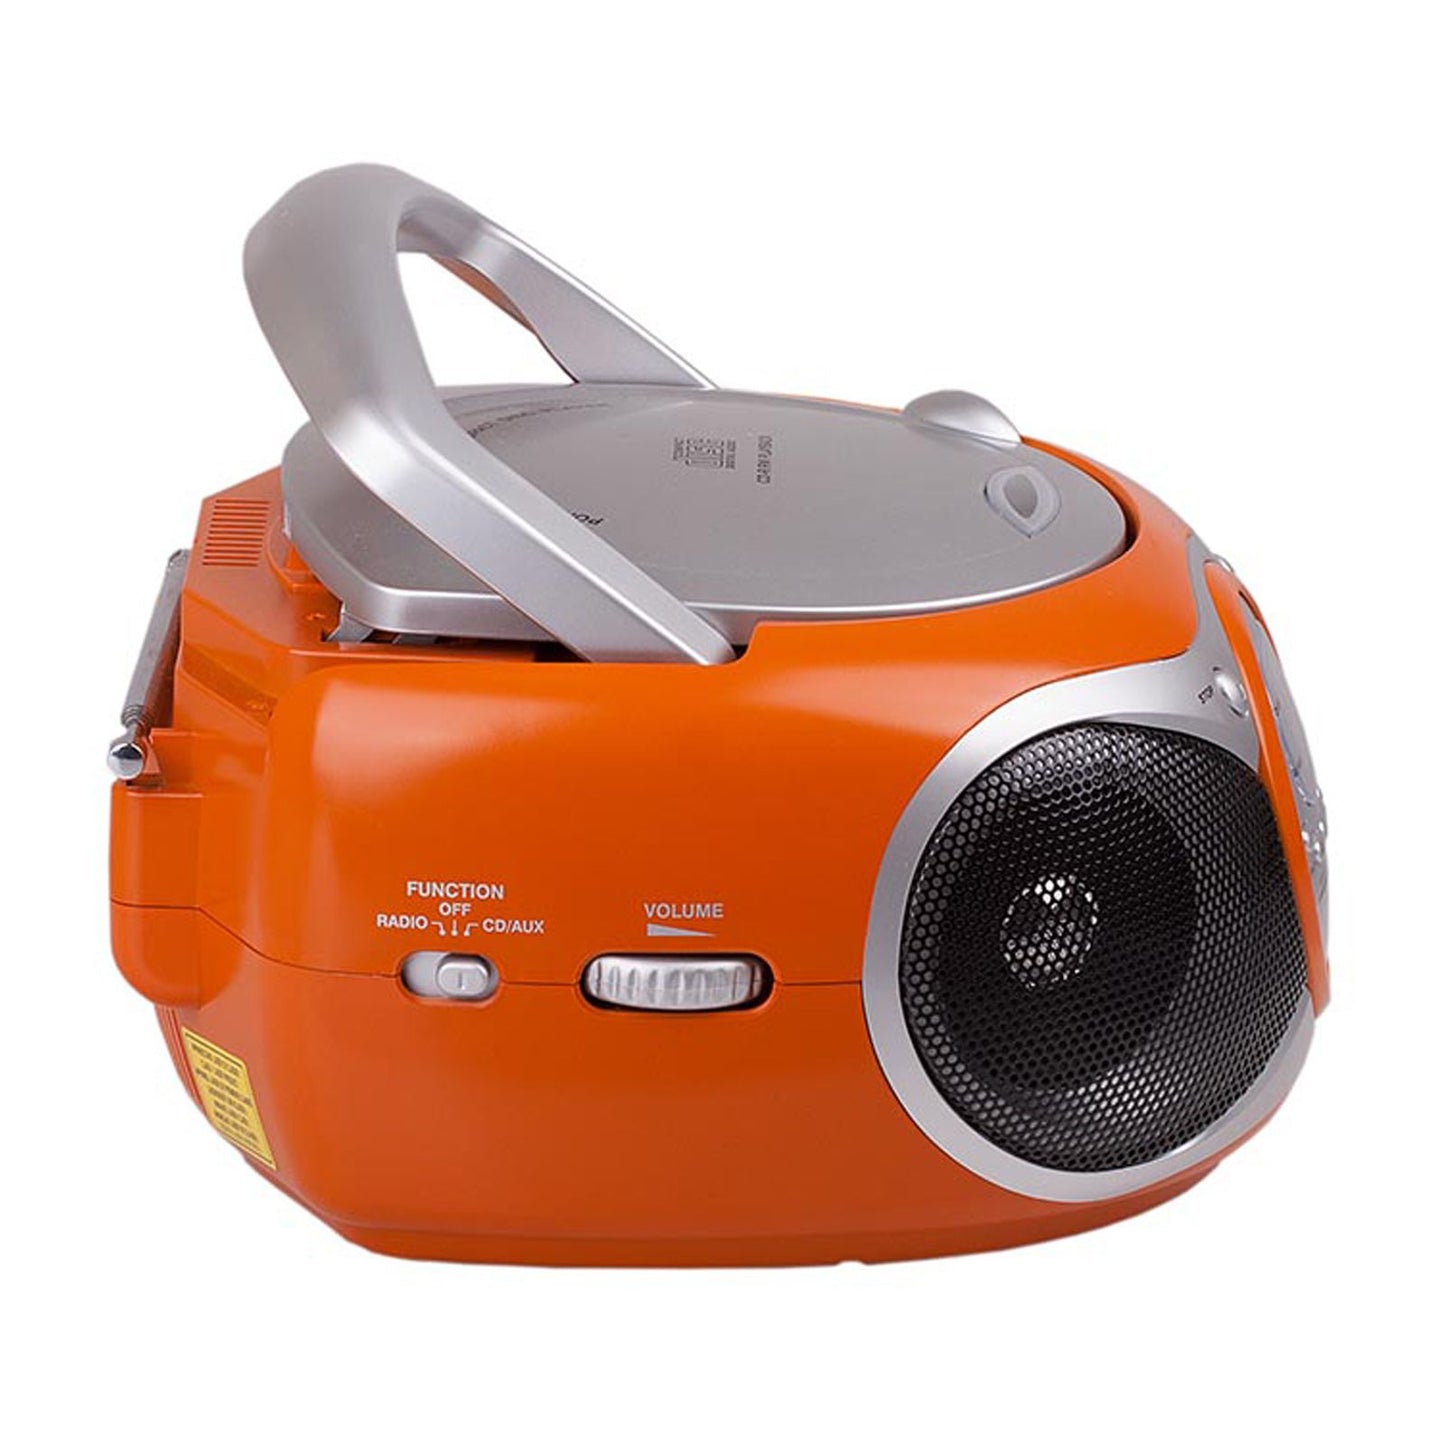 Trevi boombox portable stereo with CD player and aux input, FM radio, orange colour